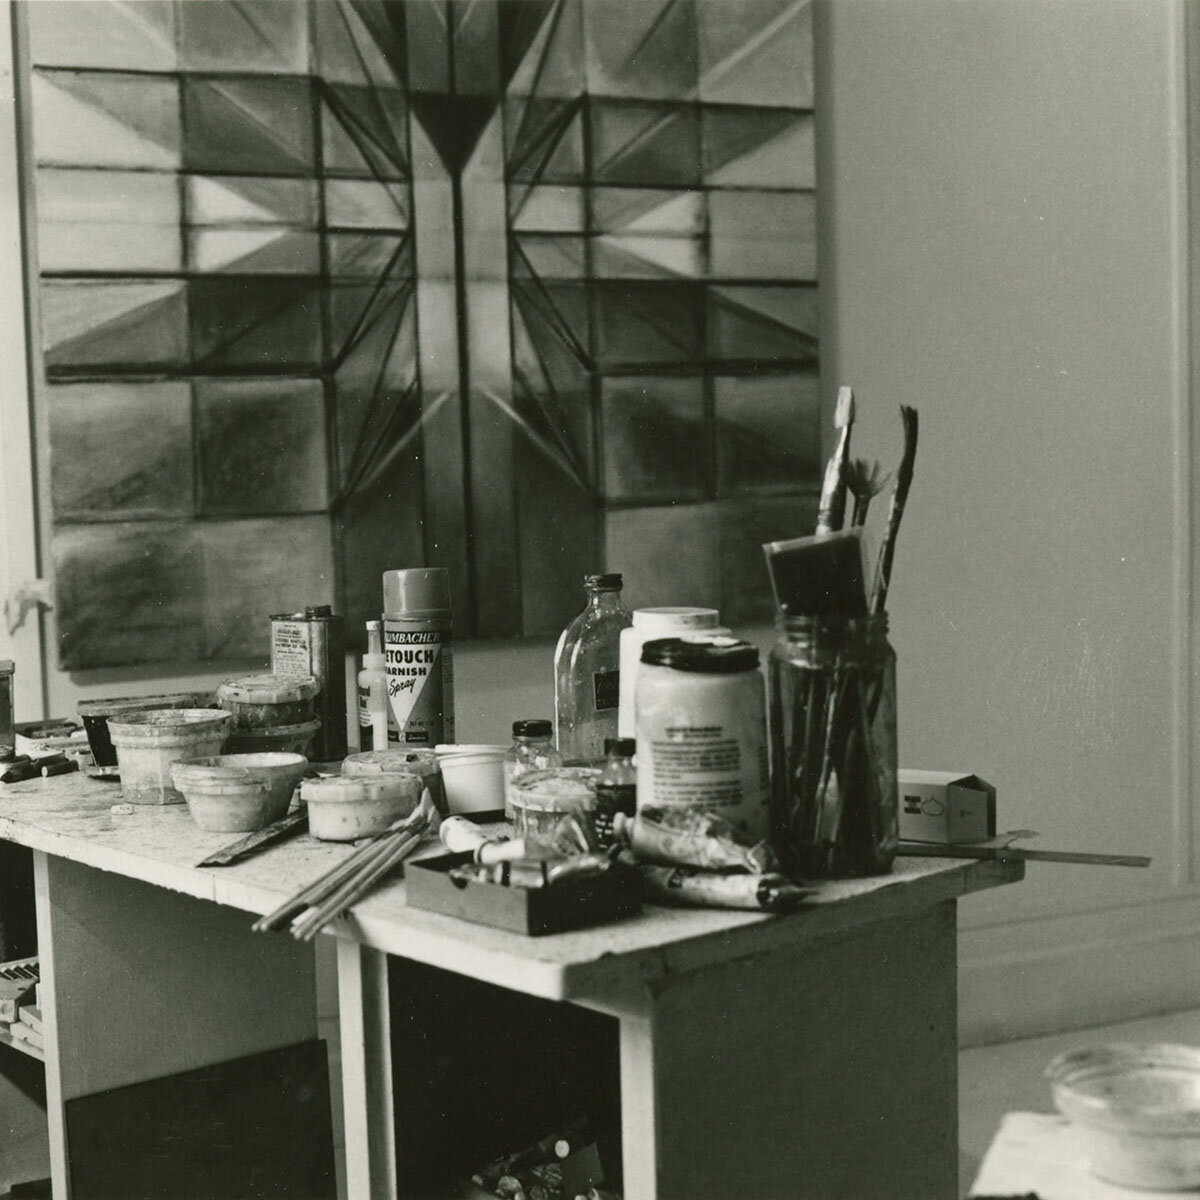  Hedda Sterne's studio, 1983 | photograph by Denise Browne Hare 